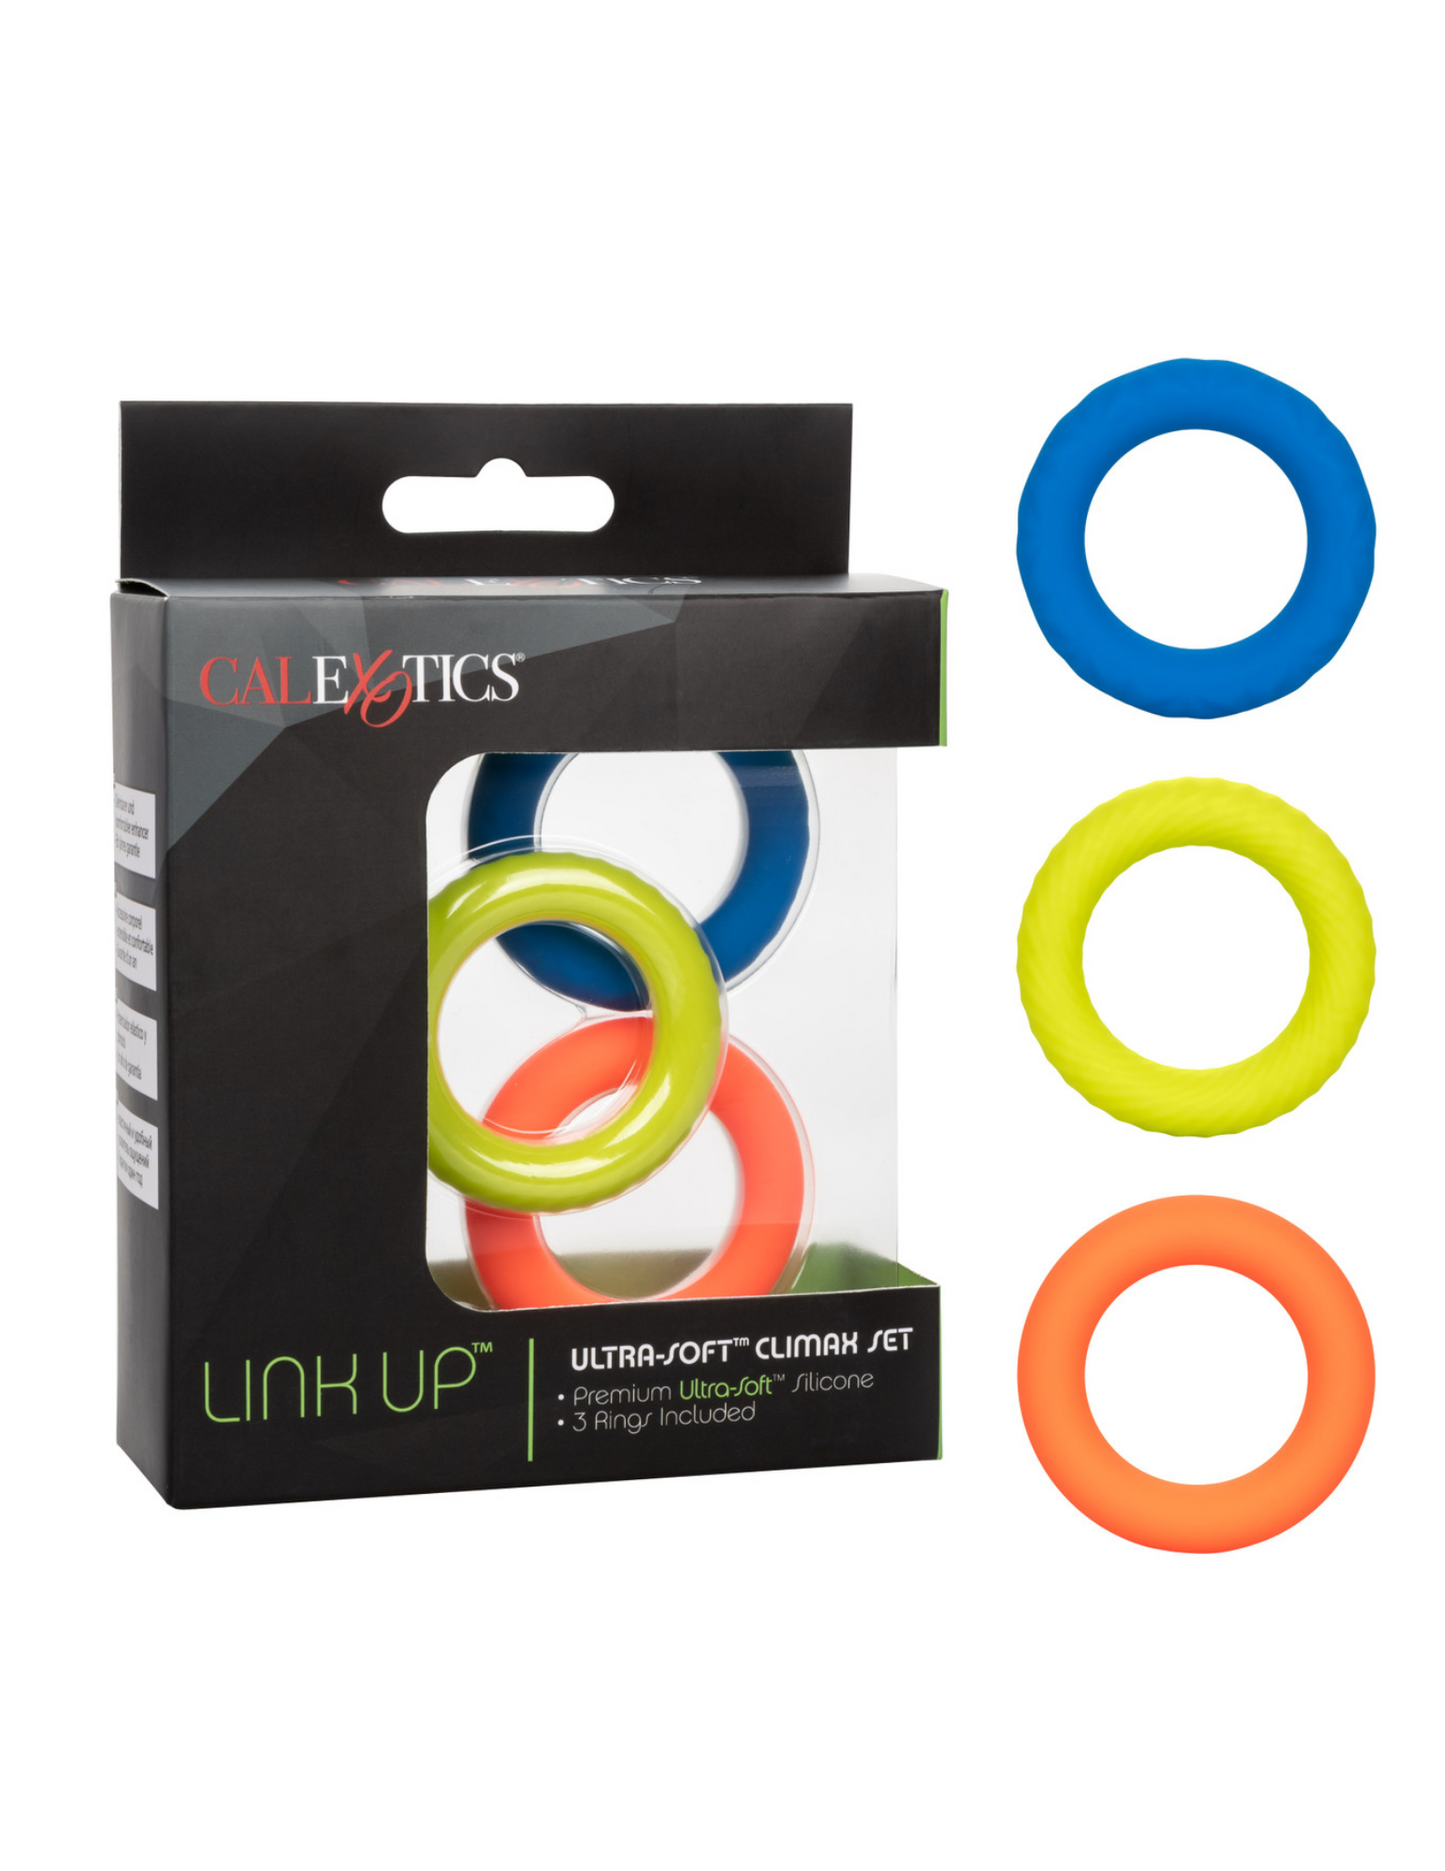 Photo shows the Link Up Ultra Soft Cock Ring Set (3pk), from CalExotics (orange, blue, green) box and product.